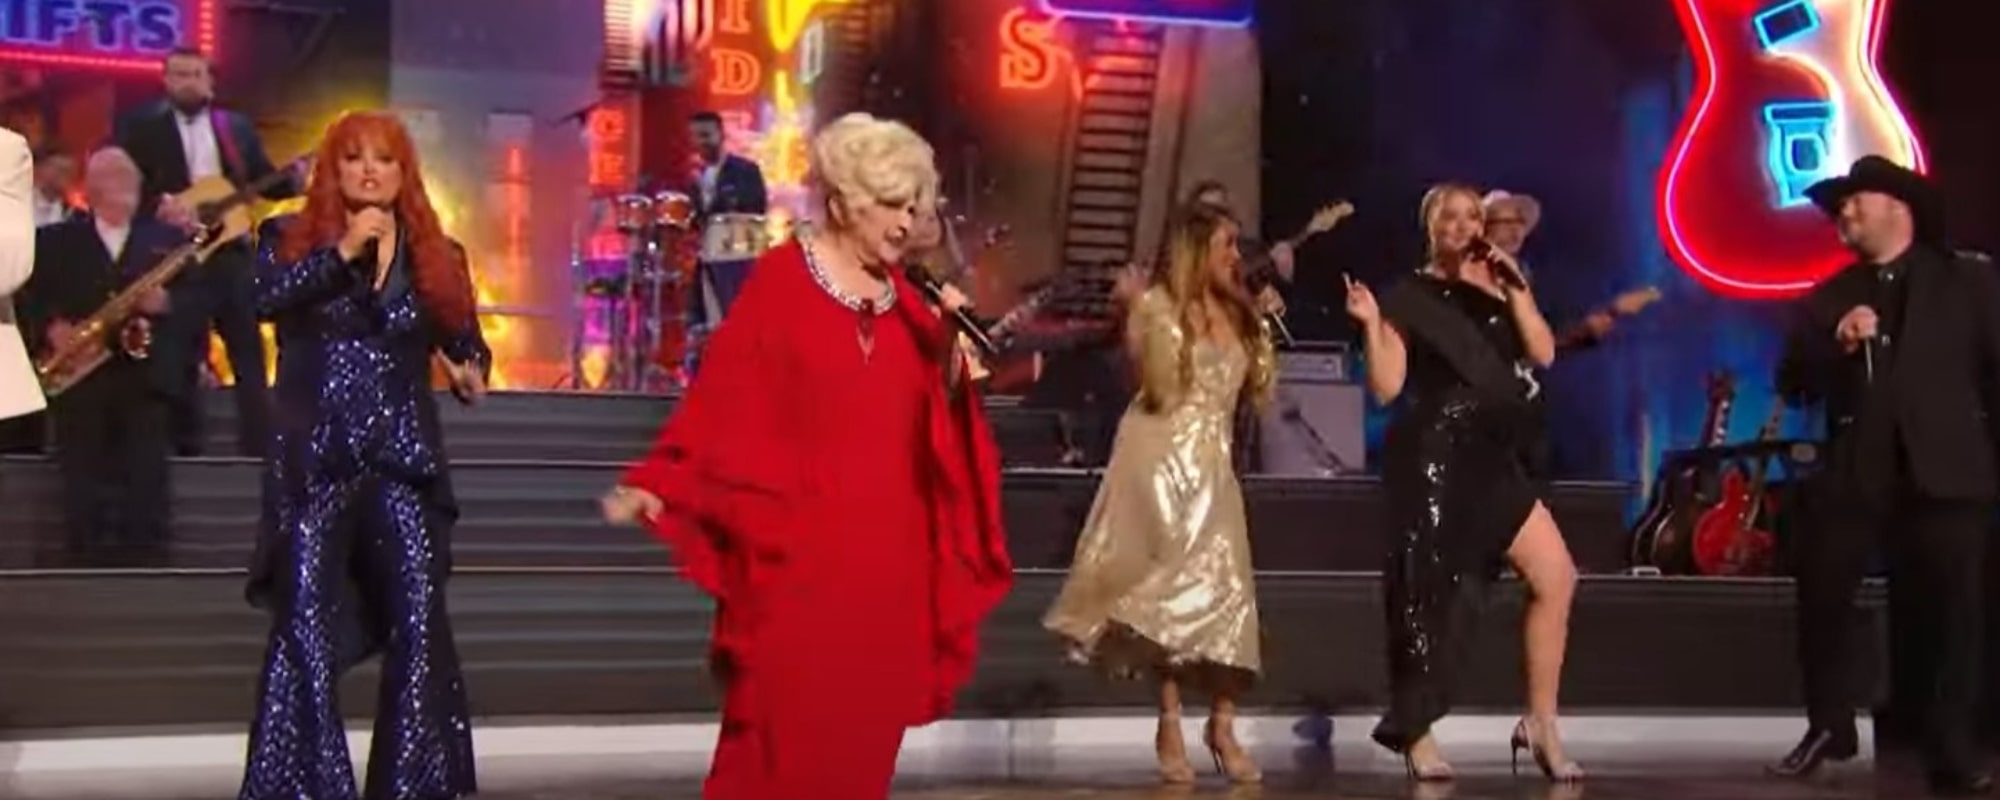 Watch: Brenda Lee Performs Rockin' Around the Christmas Tree to Close Out  'Christmas at the Opry' - American Songwriter